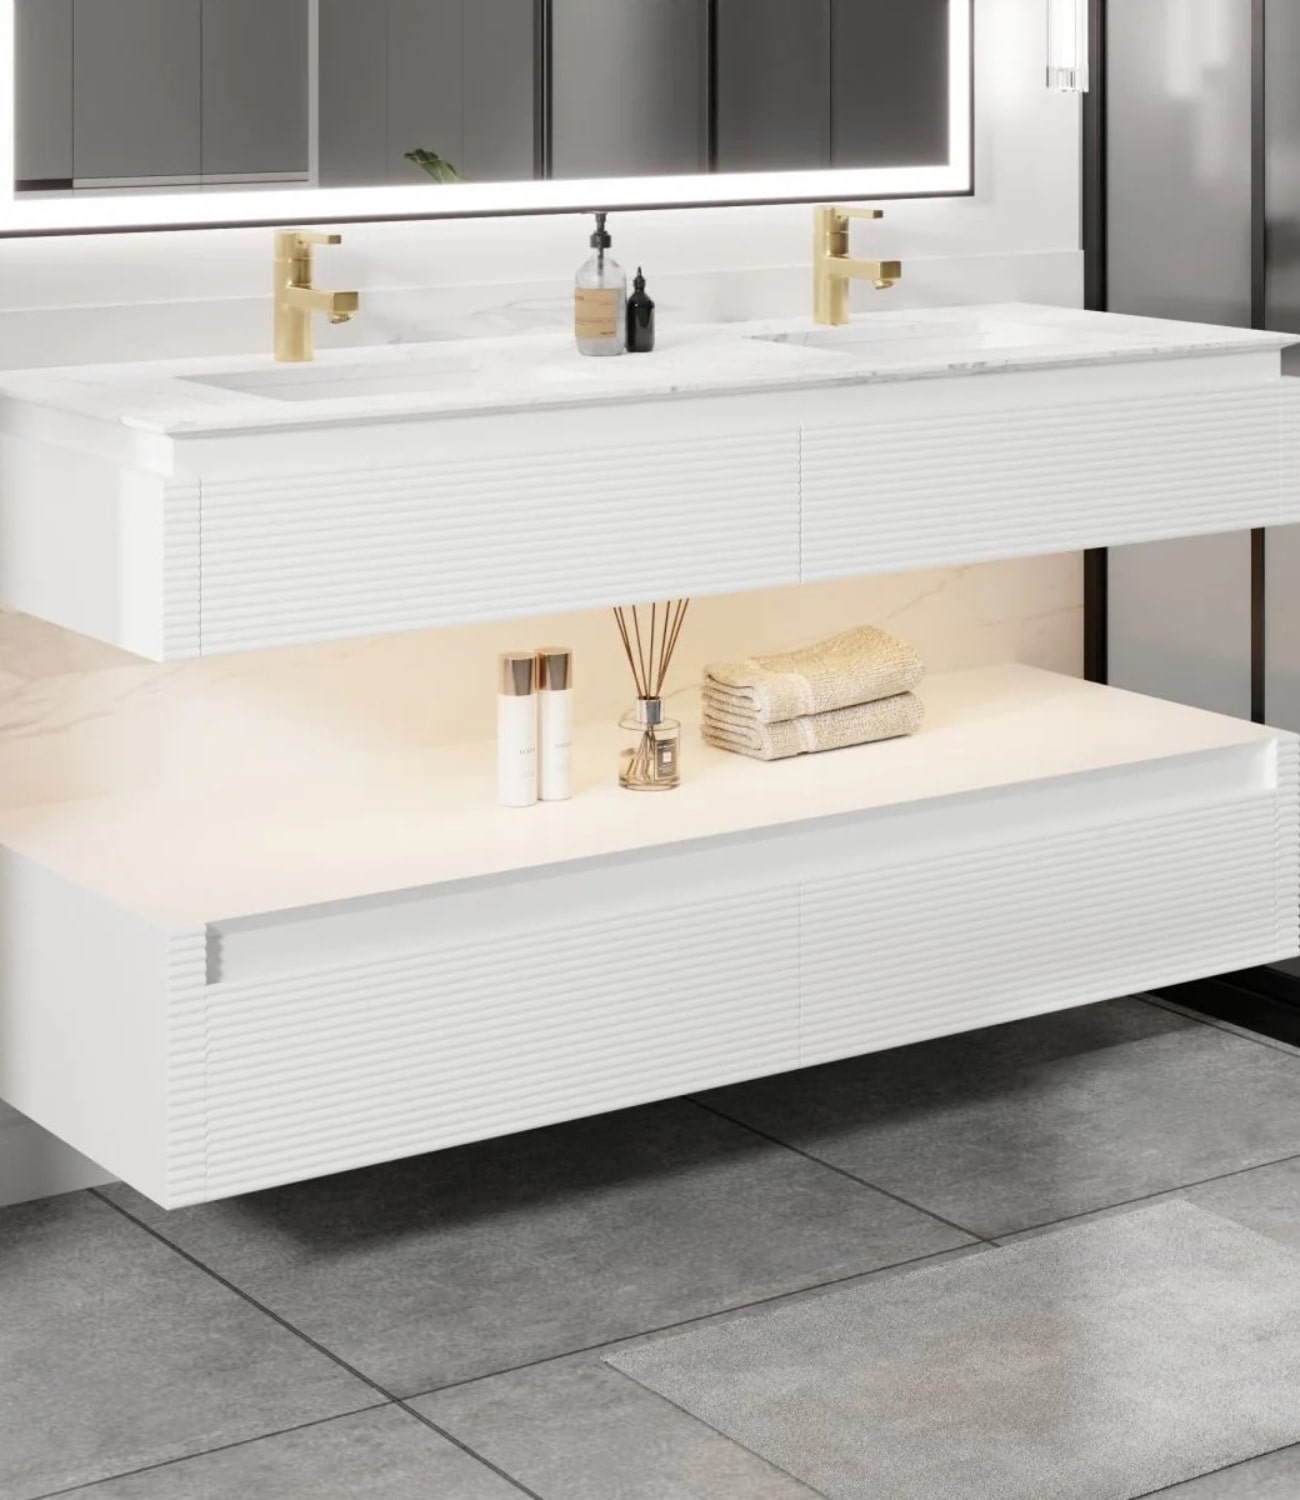 The Segeo 60 is the luxury bathroom vanity for your next bathroom makeover